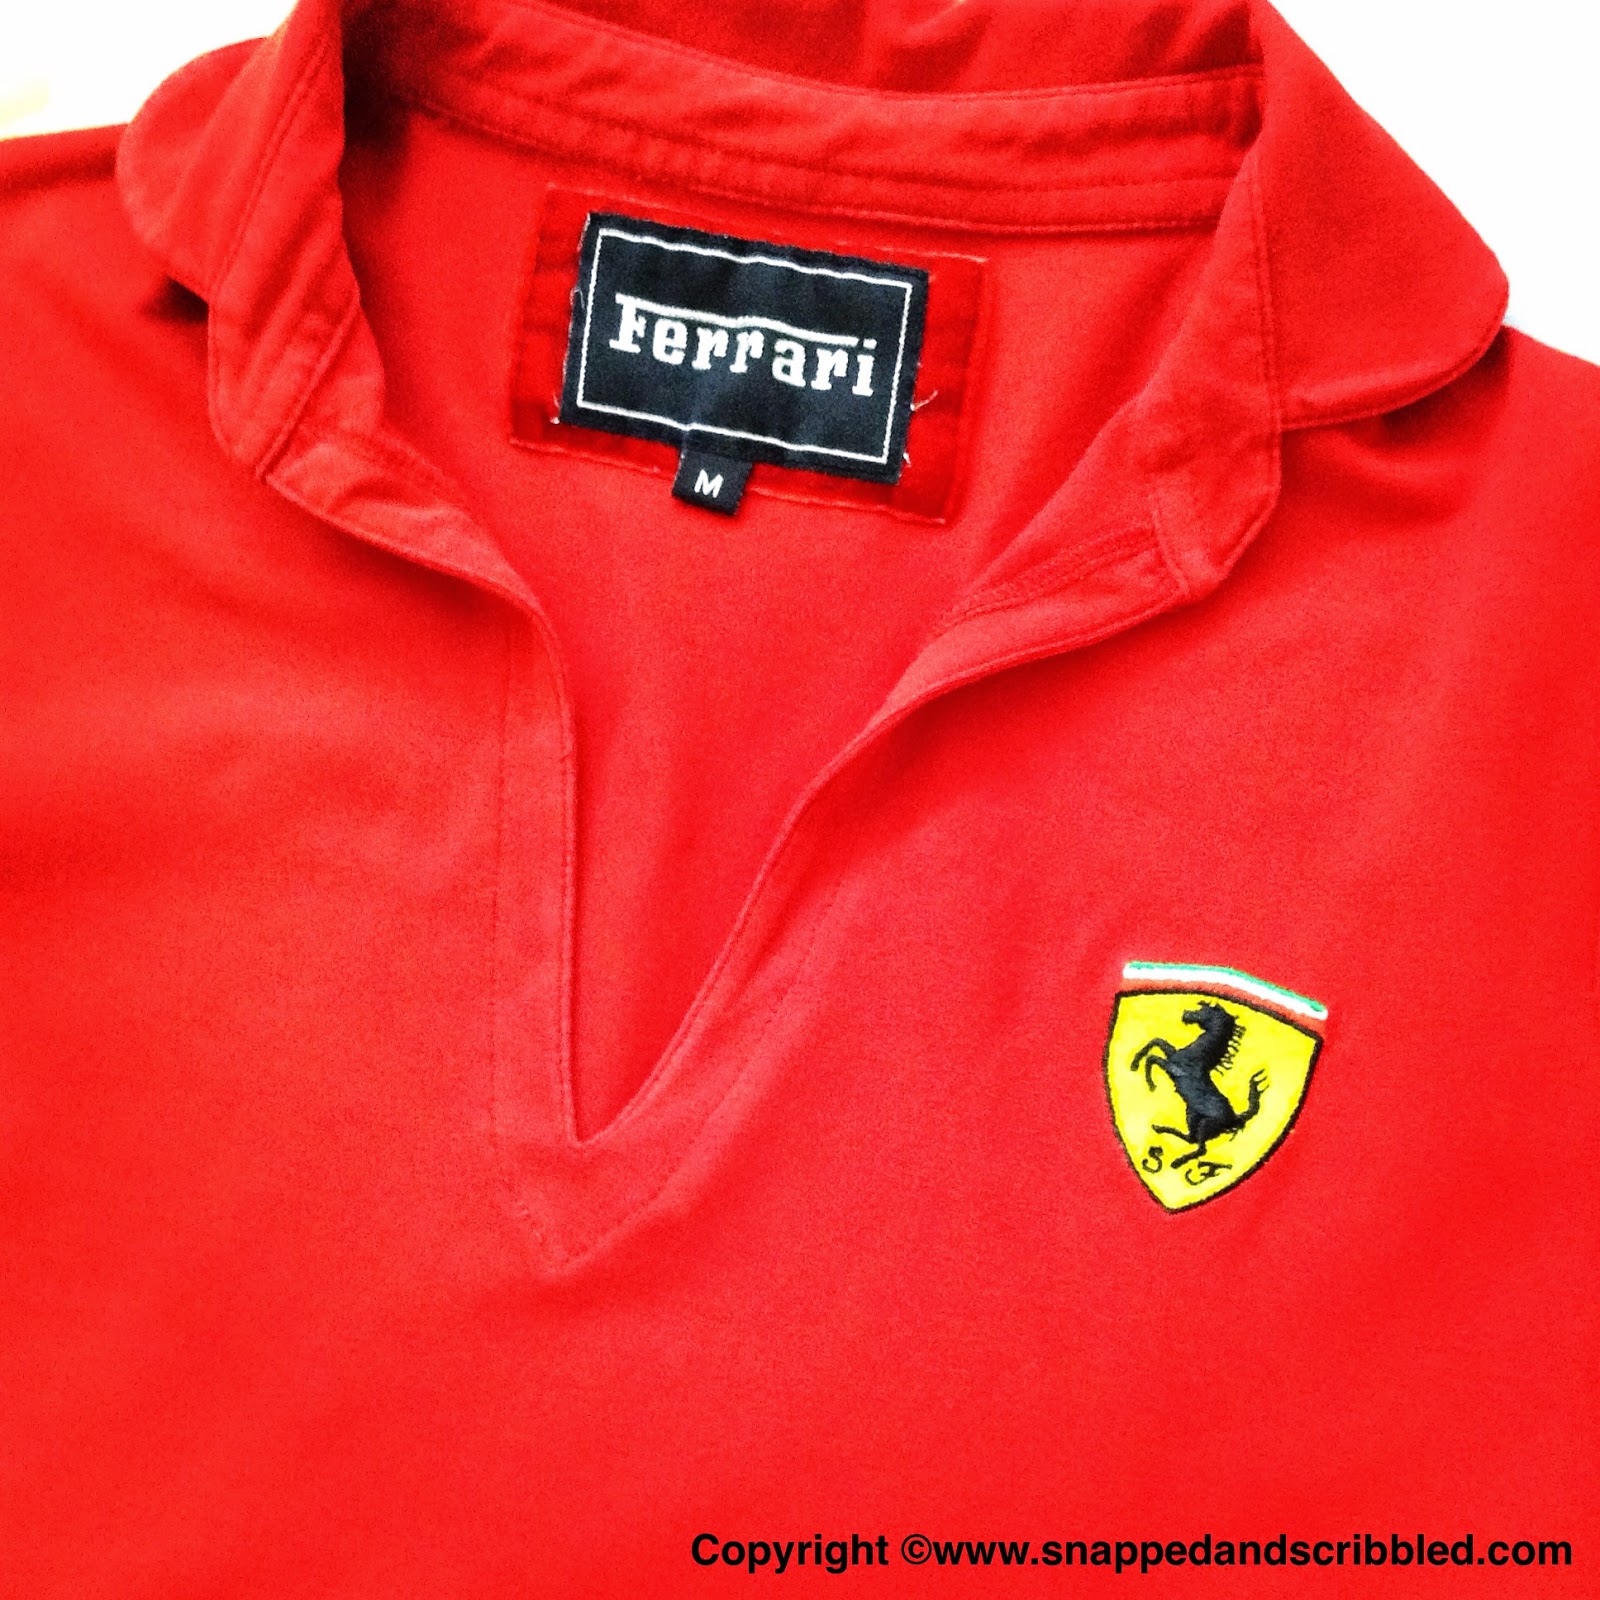 Scuderia Ferrari Clothing - Snapped and Scribbled